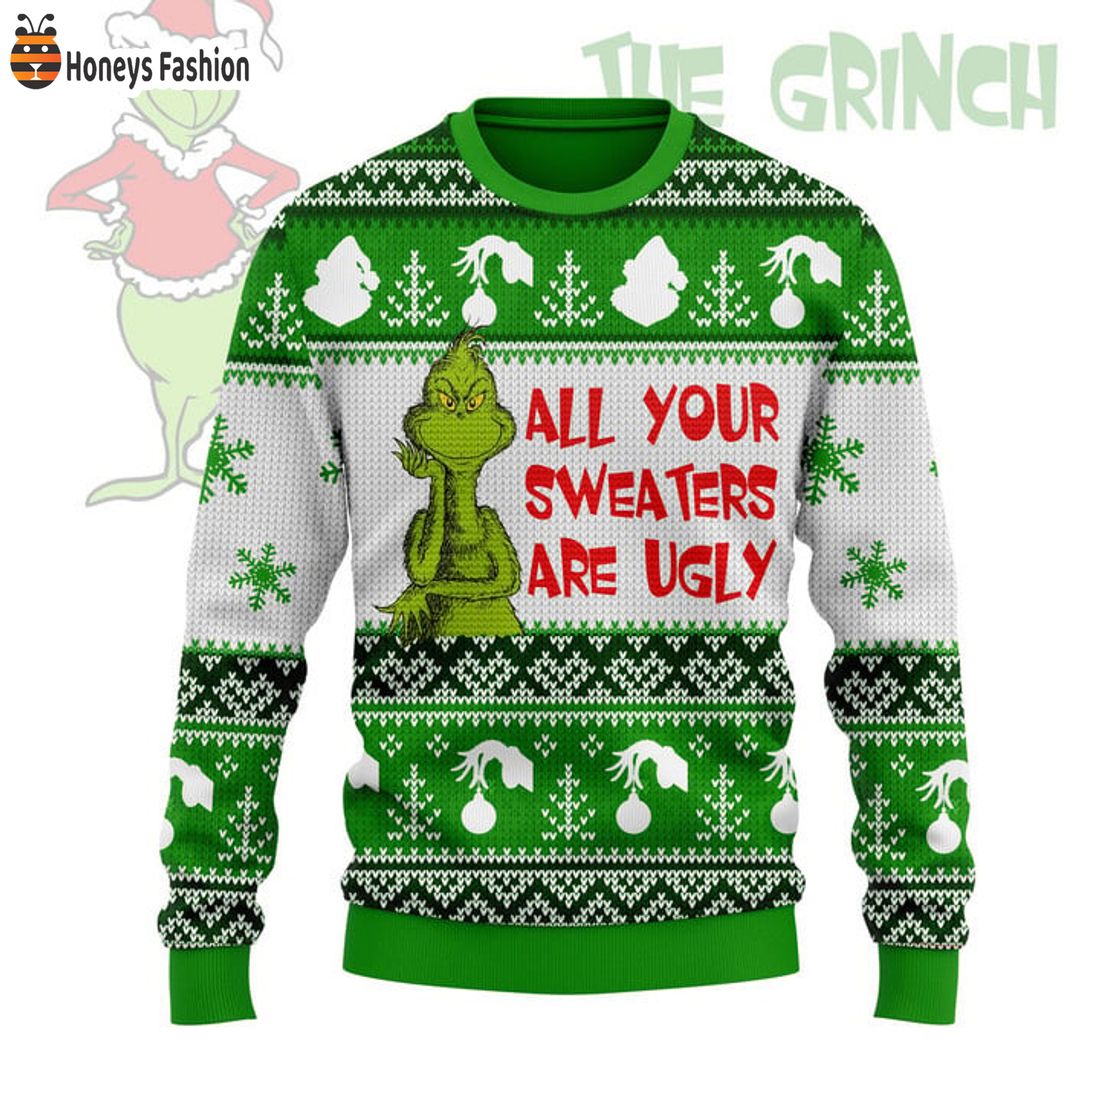 HOT The Grinch All Your Sweaters Are Ugly Green Ugly Christmas Sweater